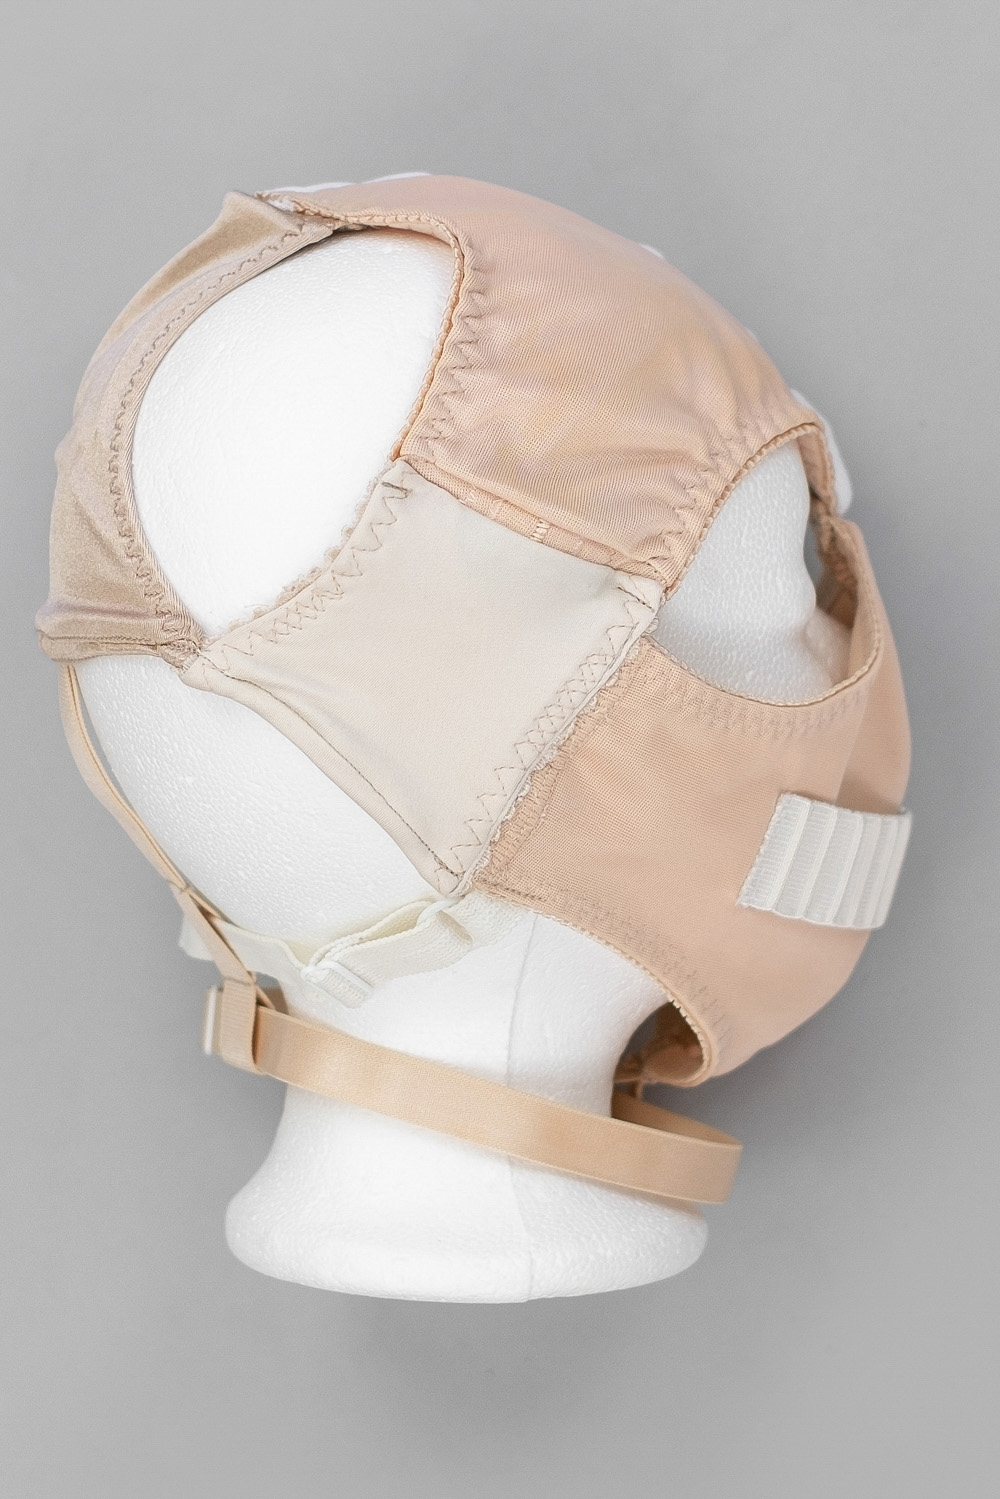 Gusset Mask in Beige and White 4